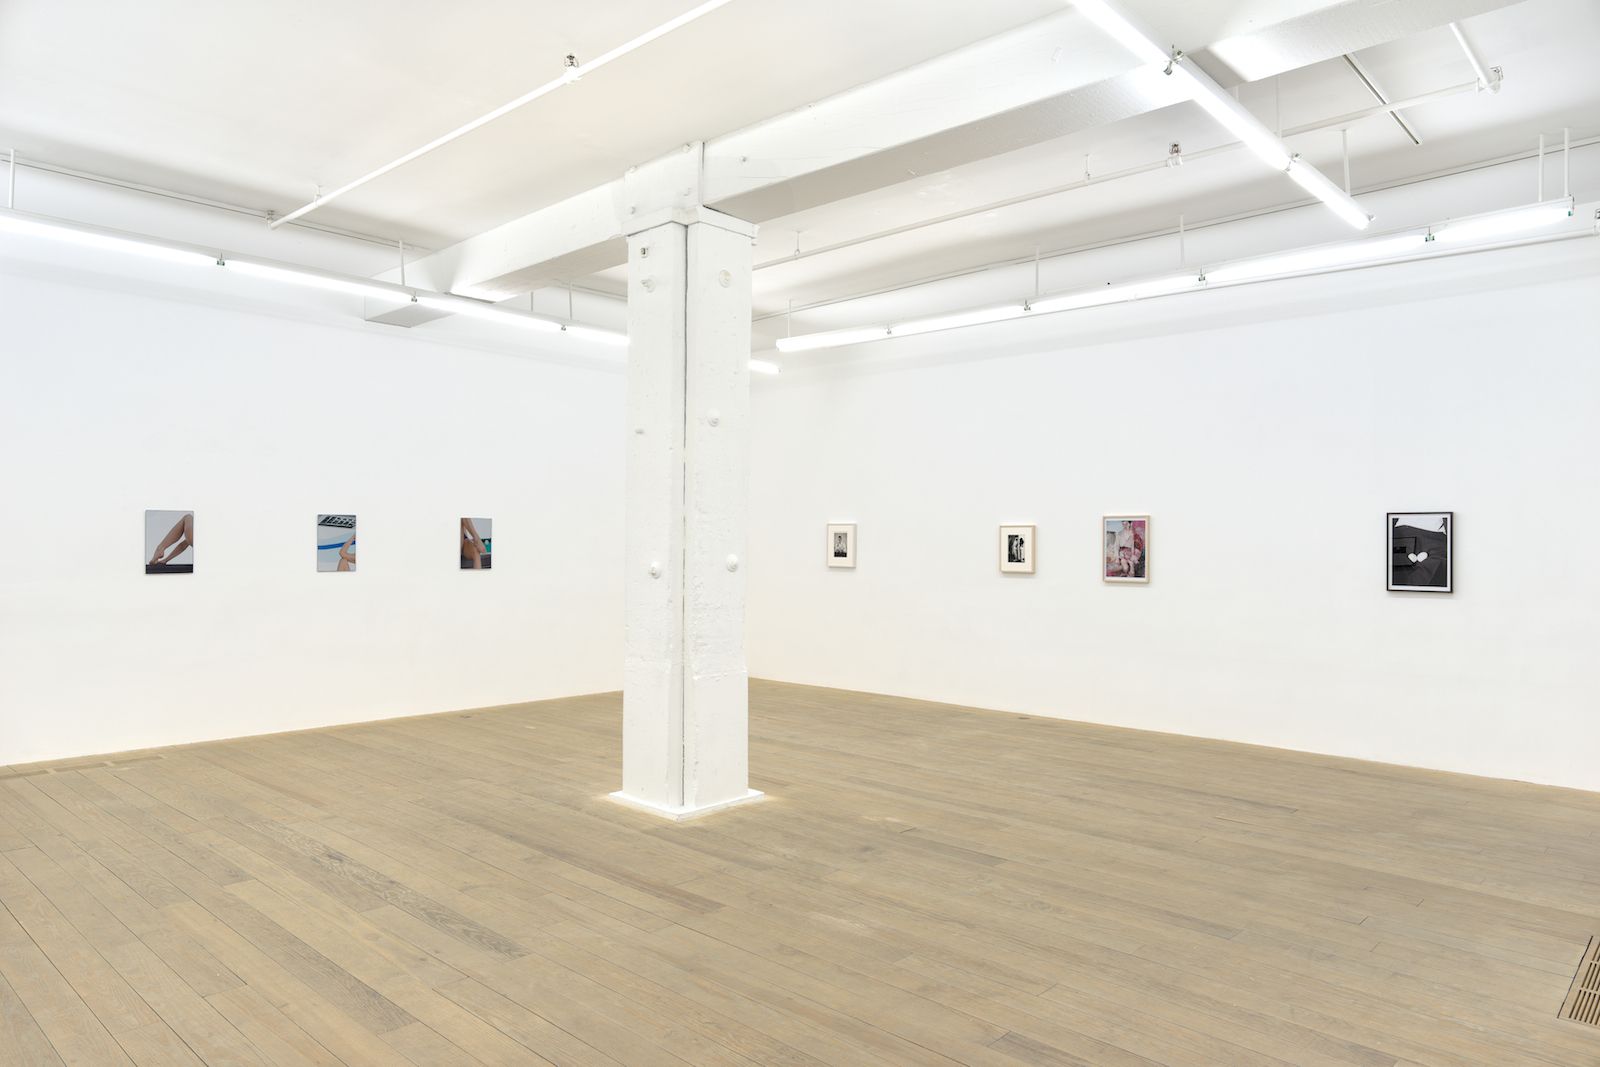 Spain & 42nd St., 2014-2015, installation view, Foxy Production, New York